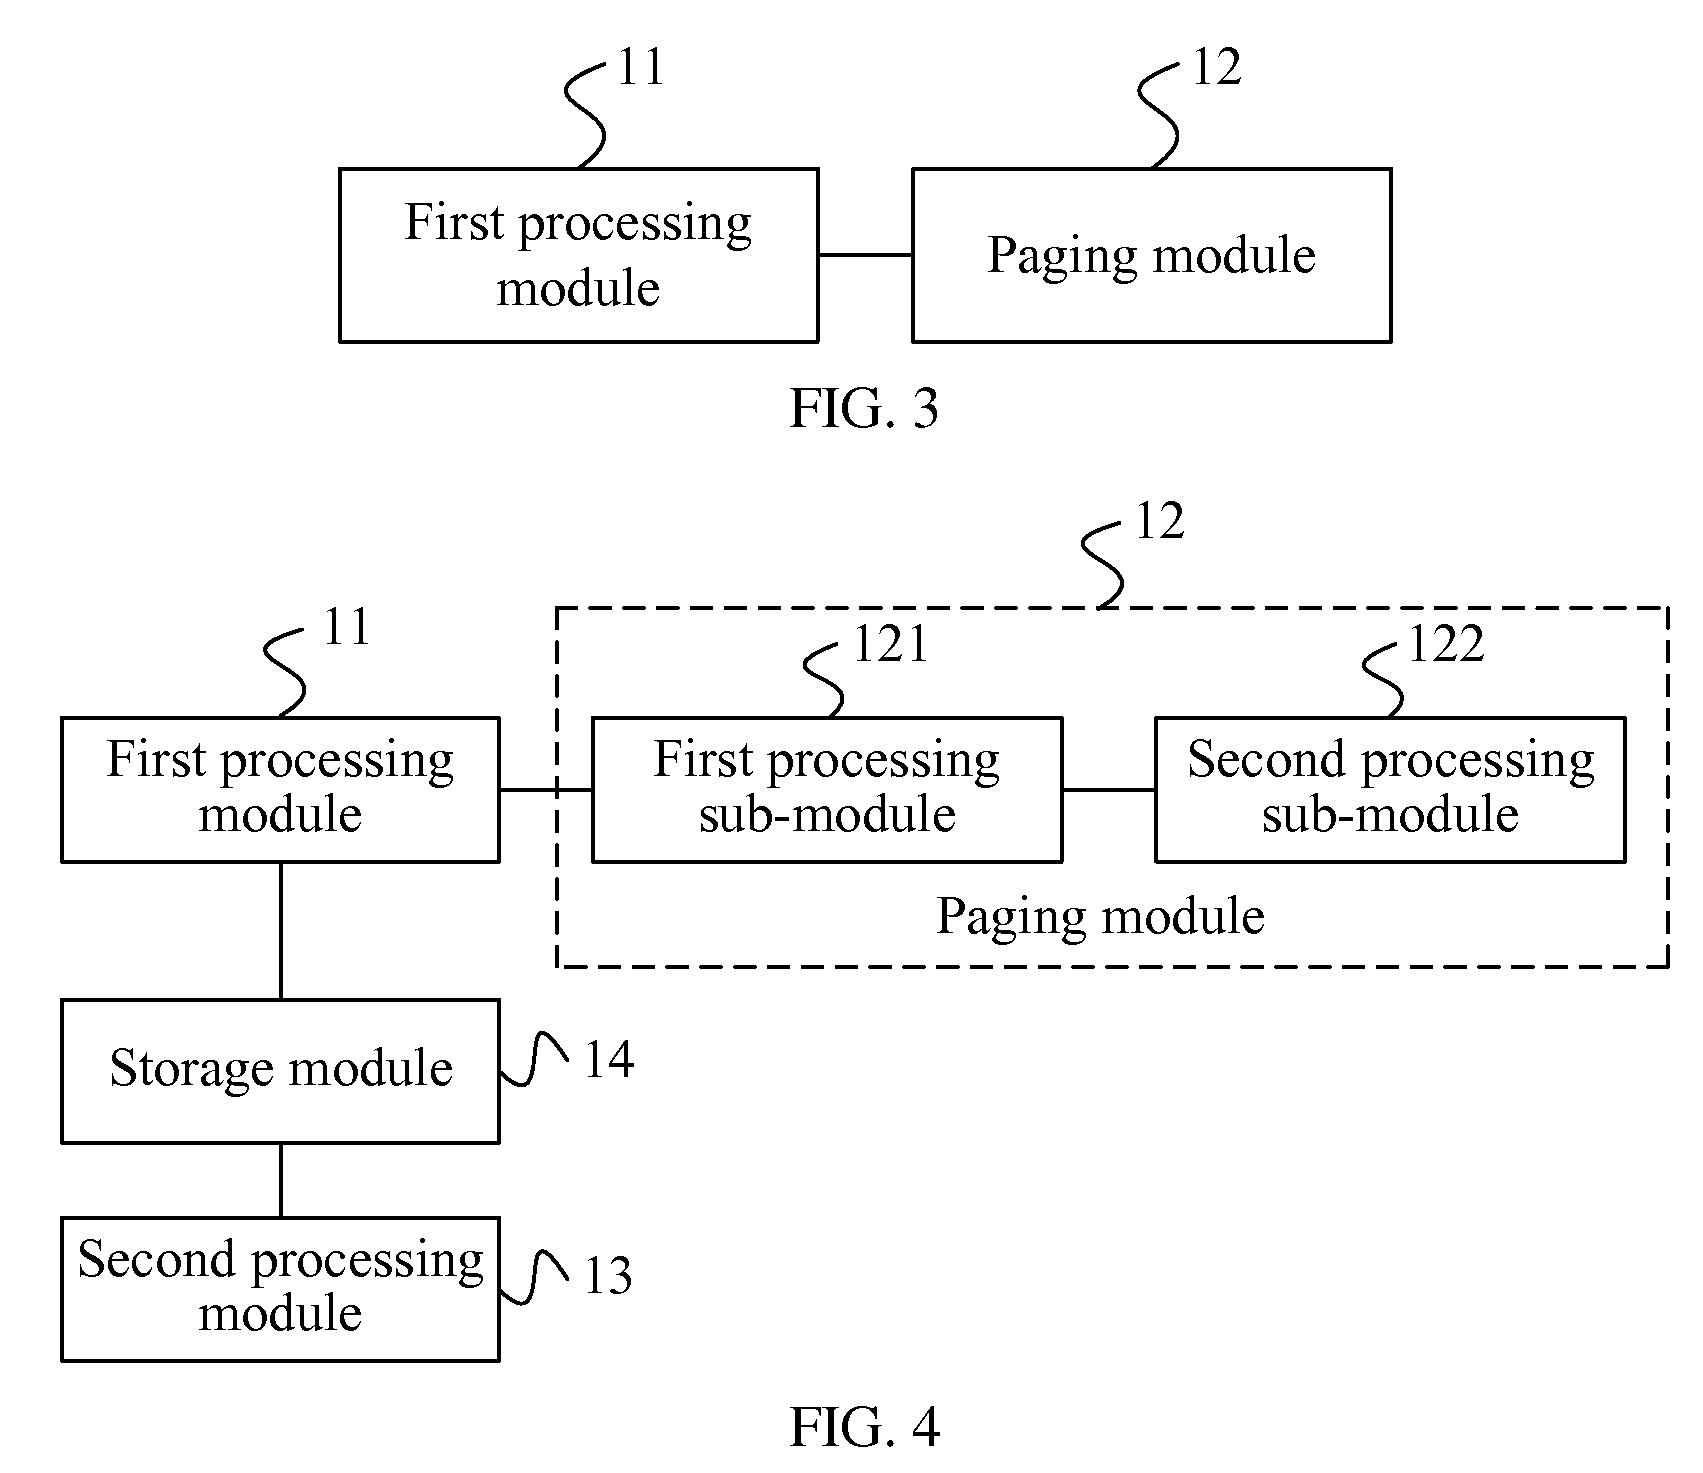 Mobile station paging method and mobile call center device